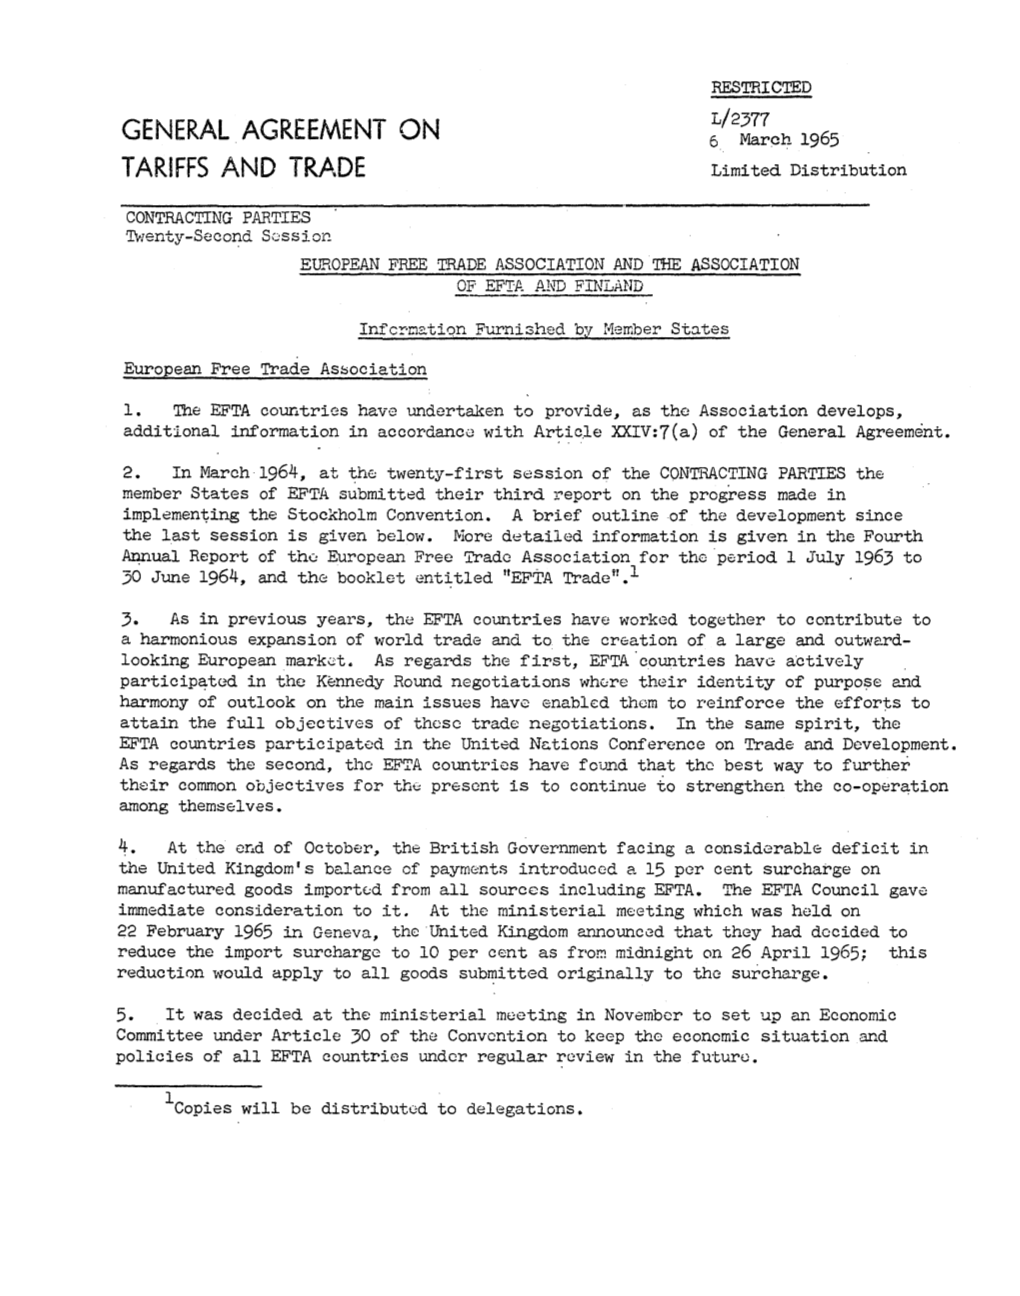 GENERAL AGREEMENT on 6 March 1965 TARIFFS and TRADE Limited Distribution